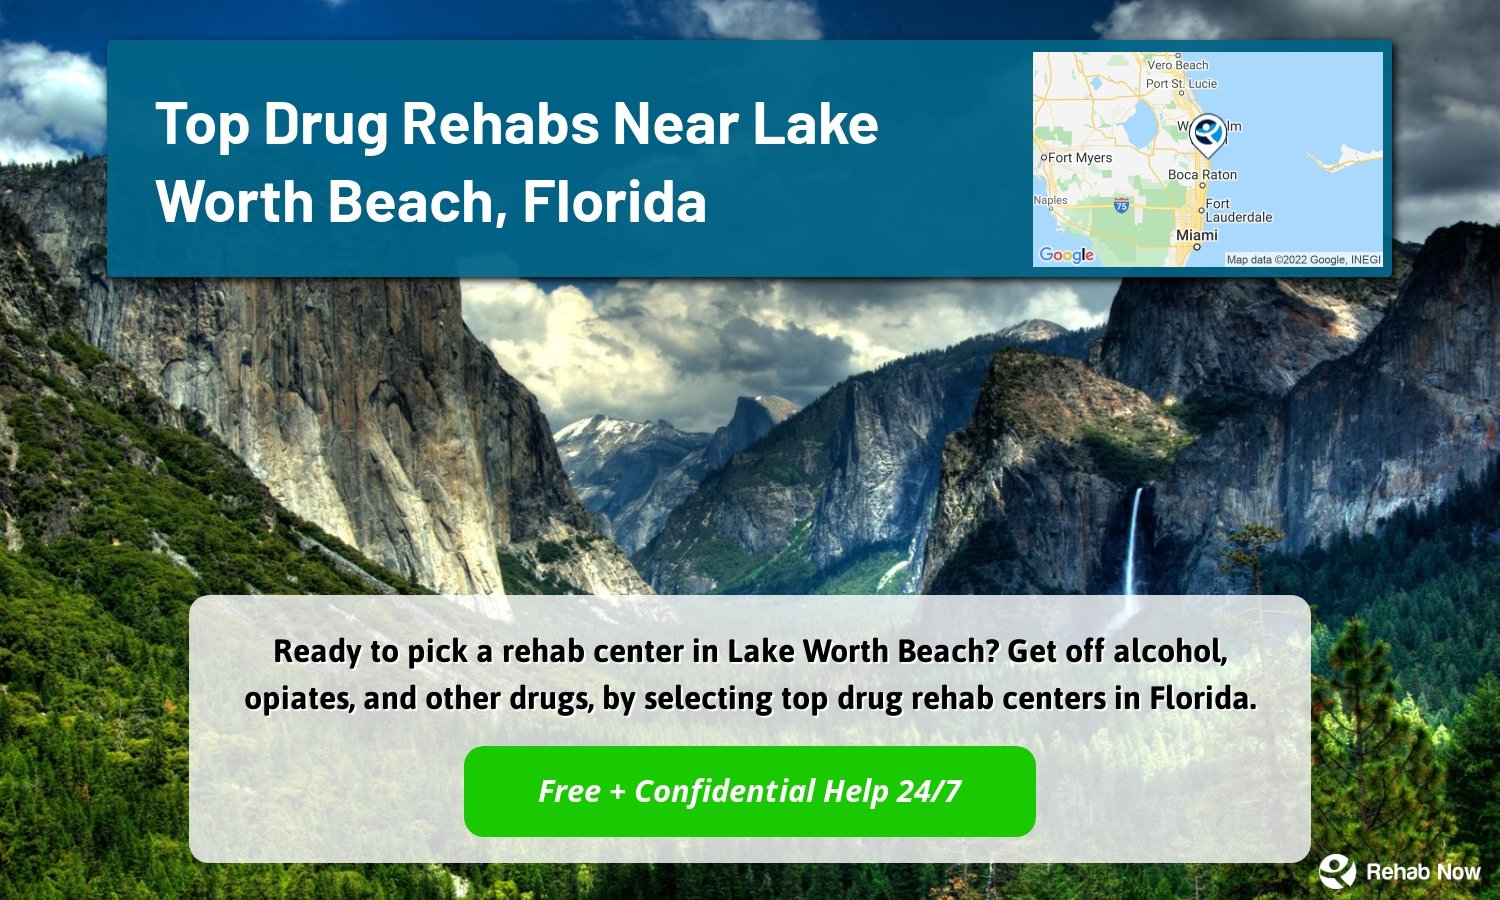 Ready to pick a rehab center in Lake Worth Beach? Get off alcohol, opiates, and other drugs, by selecting top drug rehab centers in Florida.